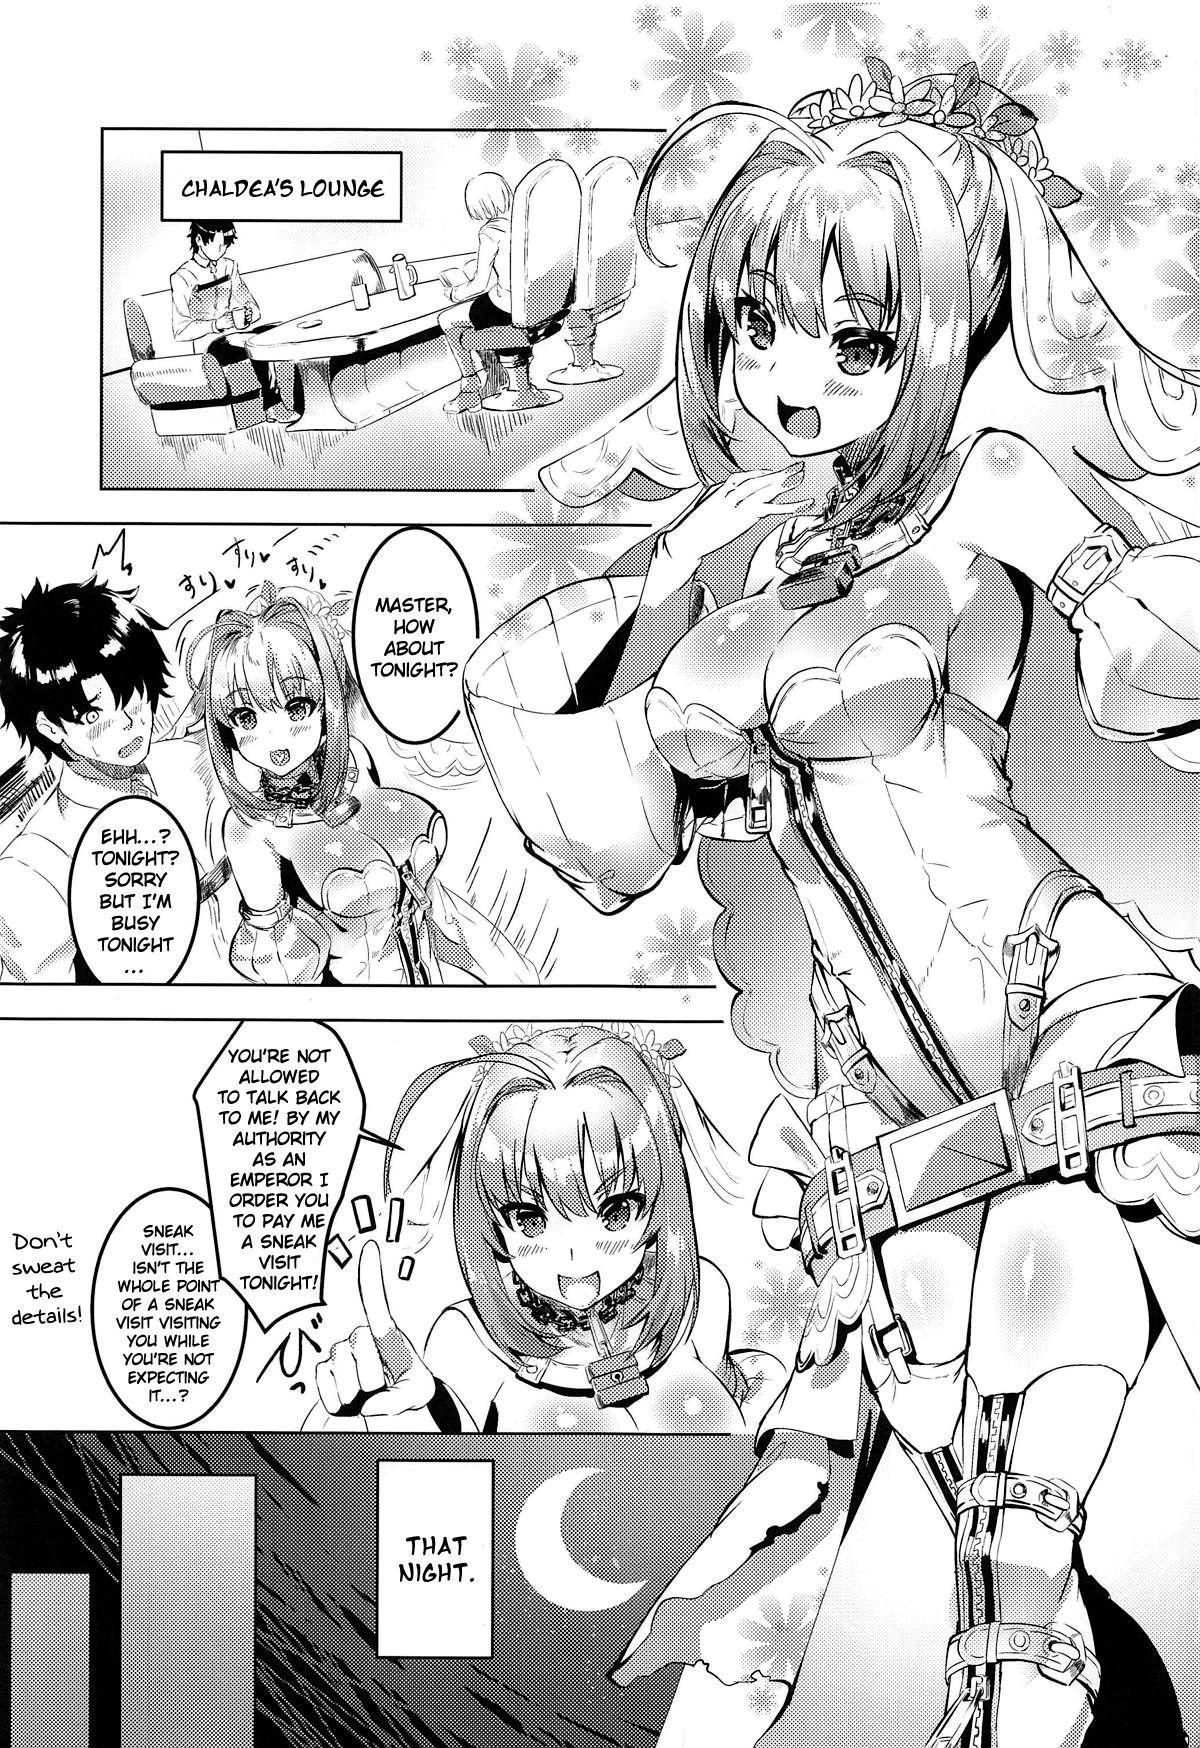 Brunet Koutei to Oni no Erohon | An Ero Book About an Emperor and an Oni - Fate grand order Kashima - Page 2